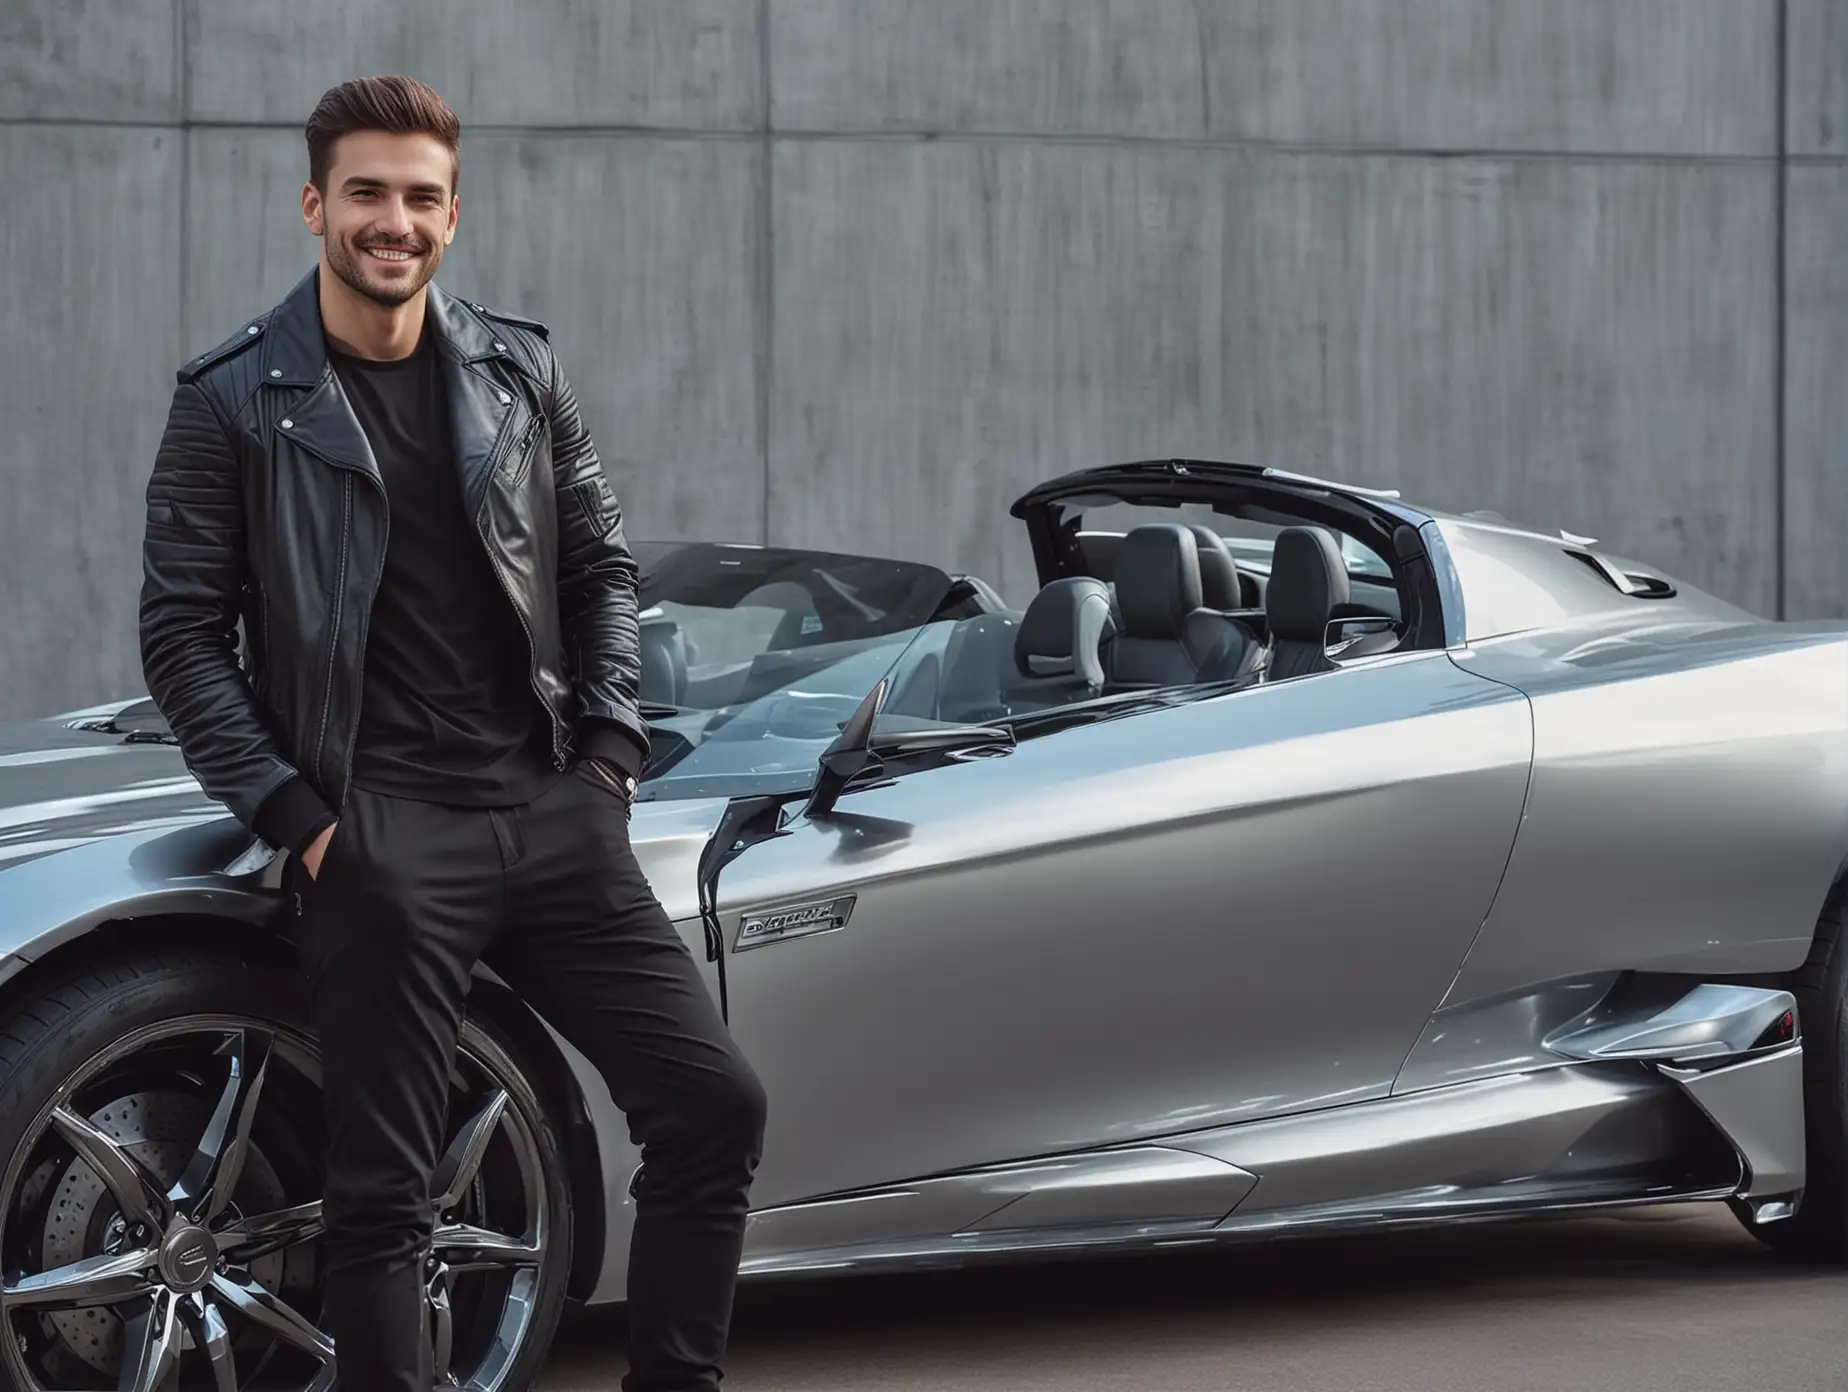 Man in Black Jacket Posing with Silver Sports Car Amid Futuristic Tech and Rocks